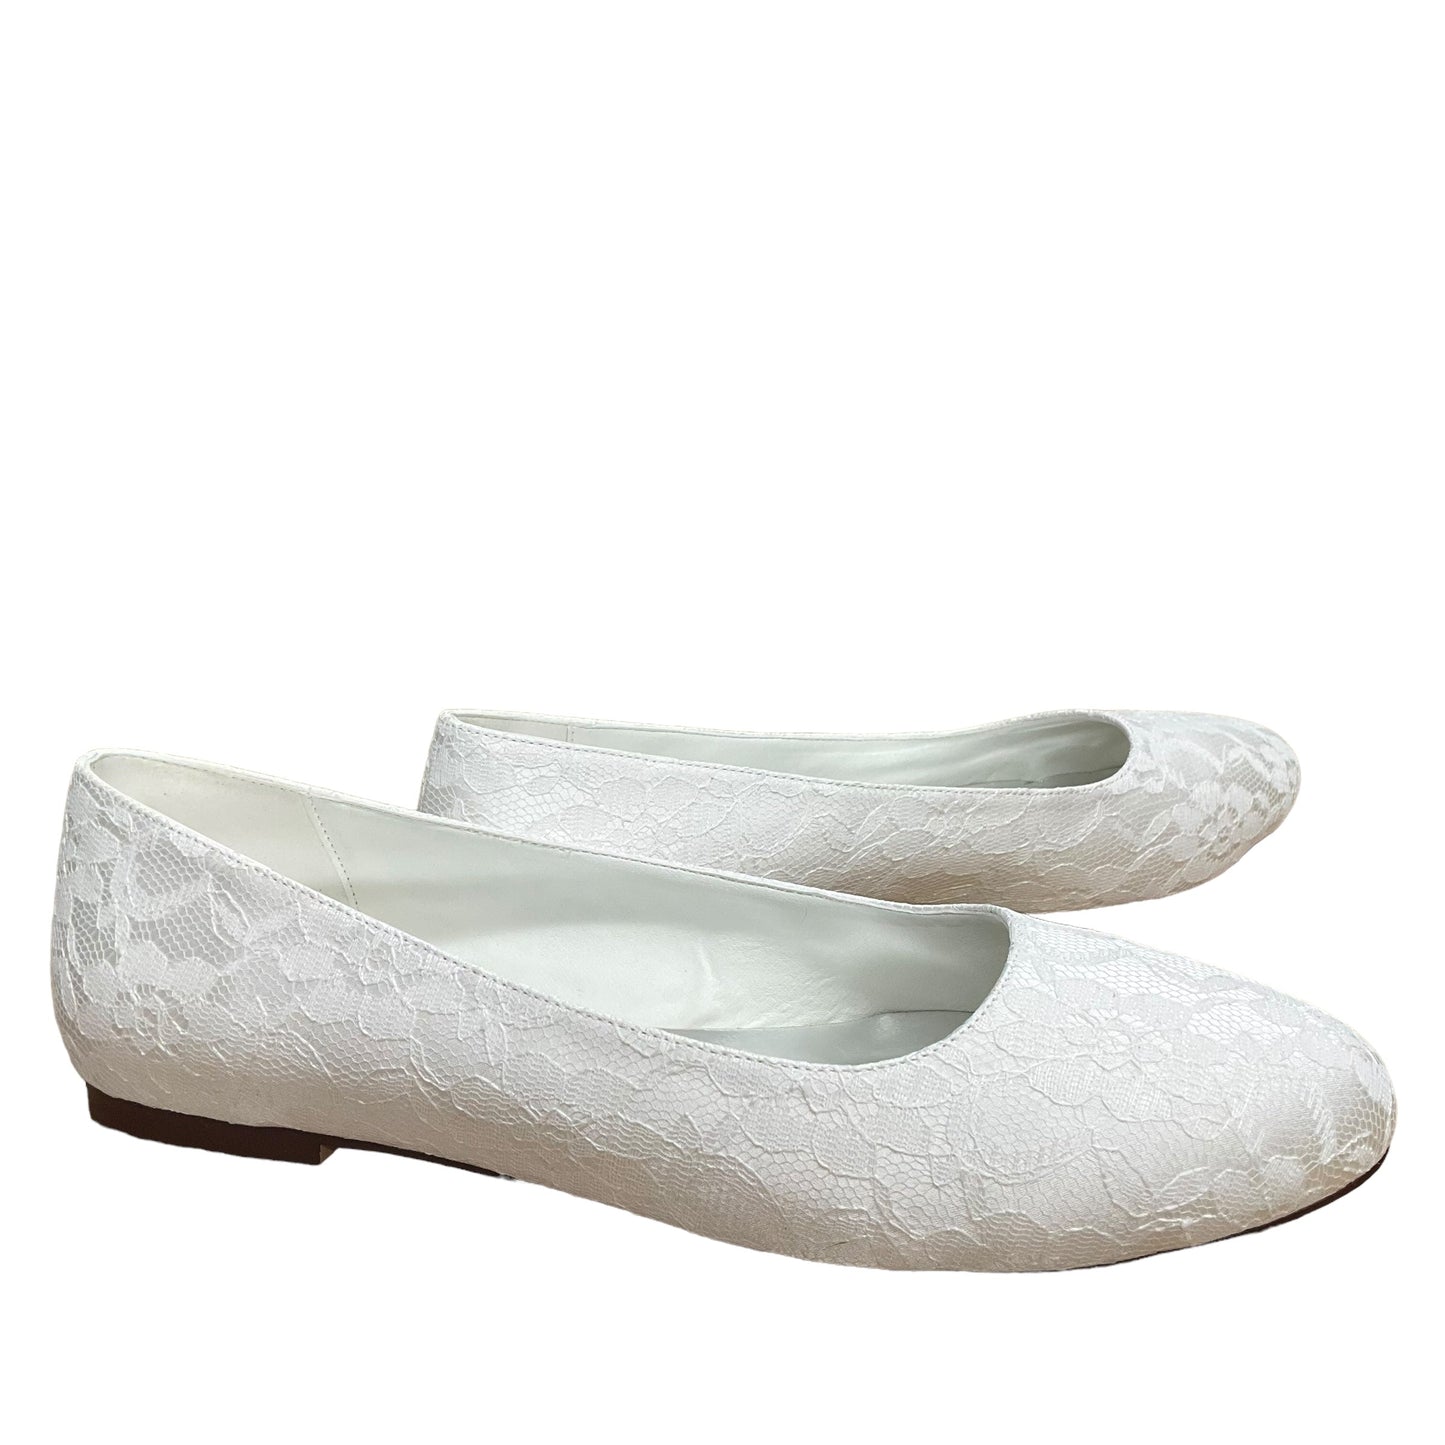 White Shoes Flats Clothes Mentor, Size 11